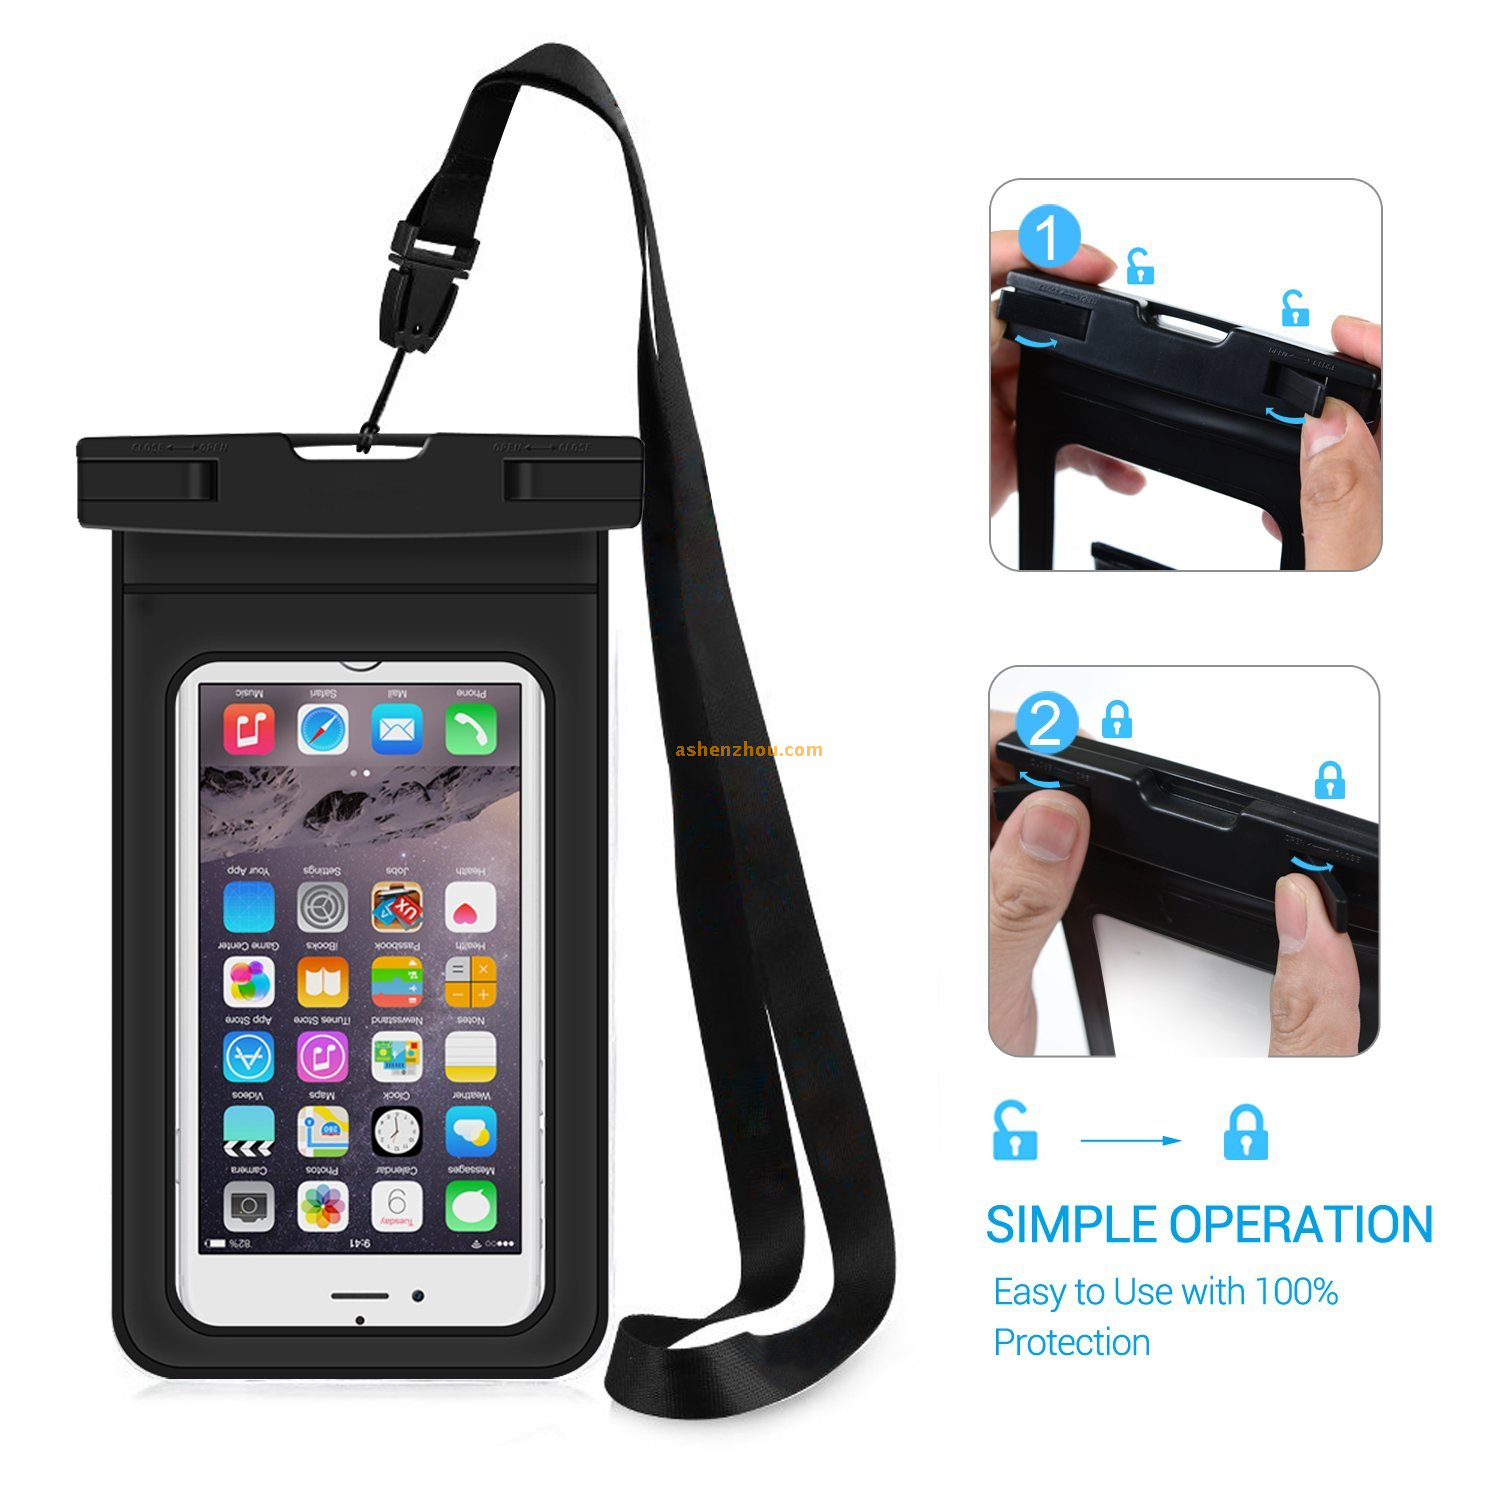 Custom mobile phone case waterproof pouch bag, cell phone dry bag ...